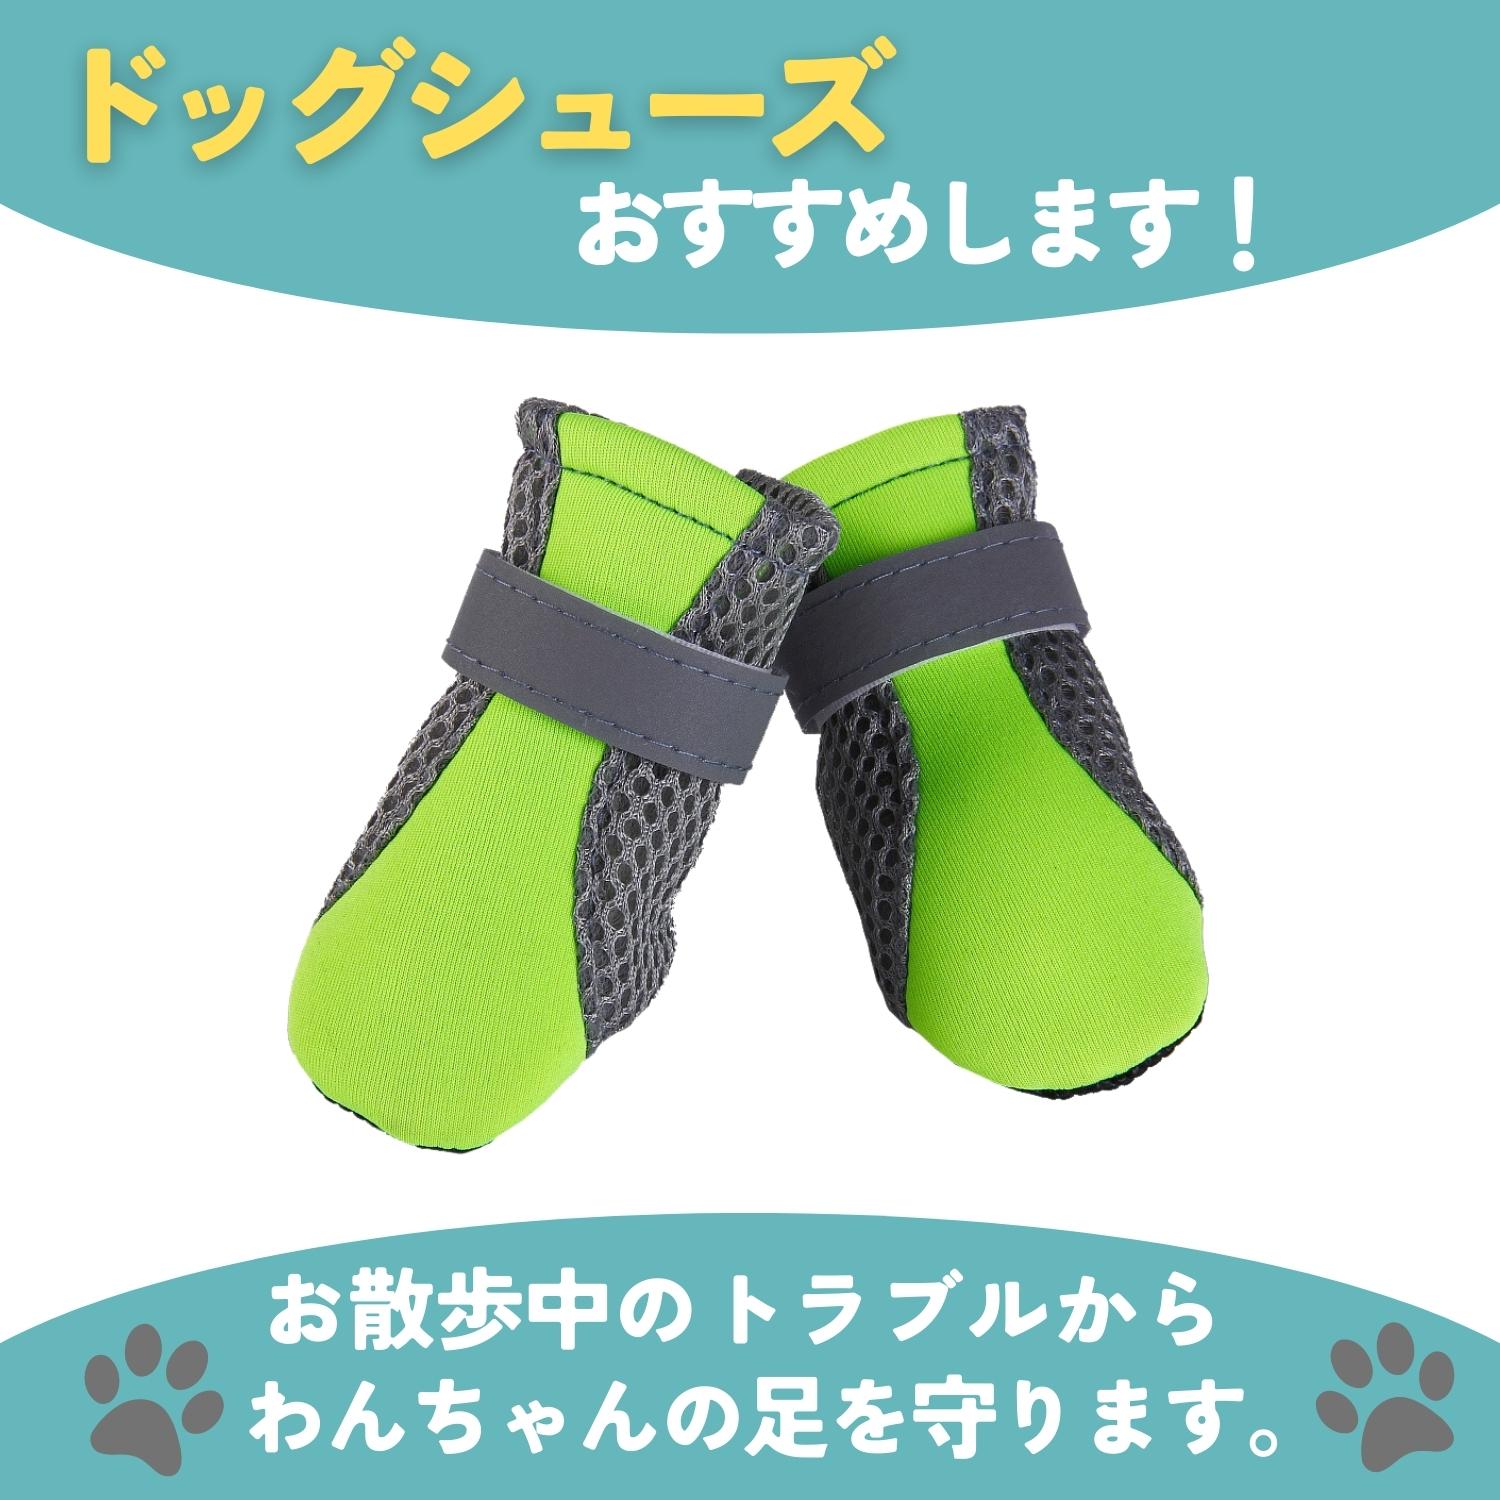  dog shoes small size dog dog .. not large dog medium sized dog slip prevention pad walk fire scratch sole protection waterproof . dog 